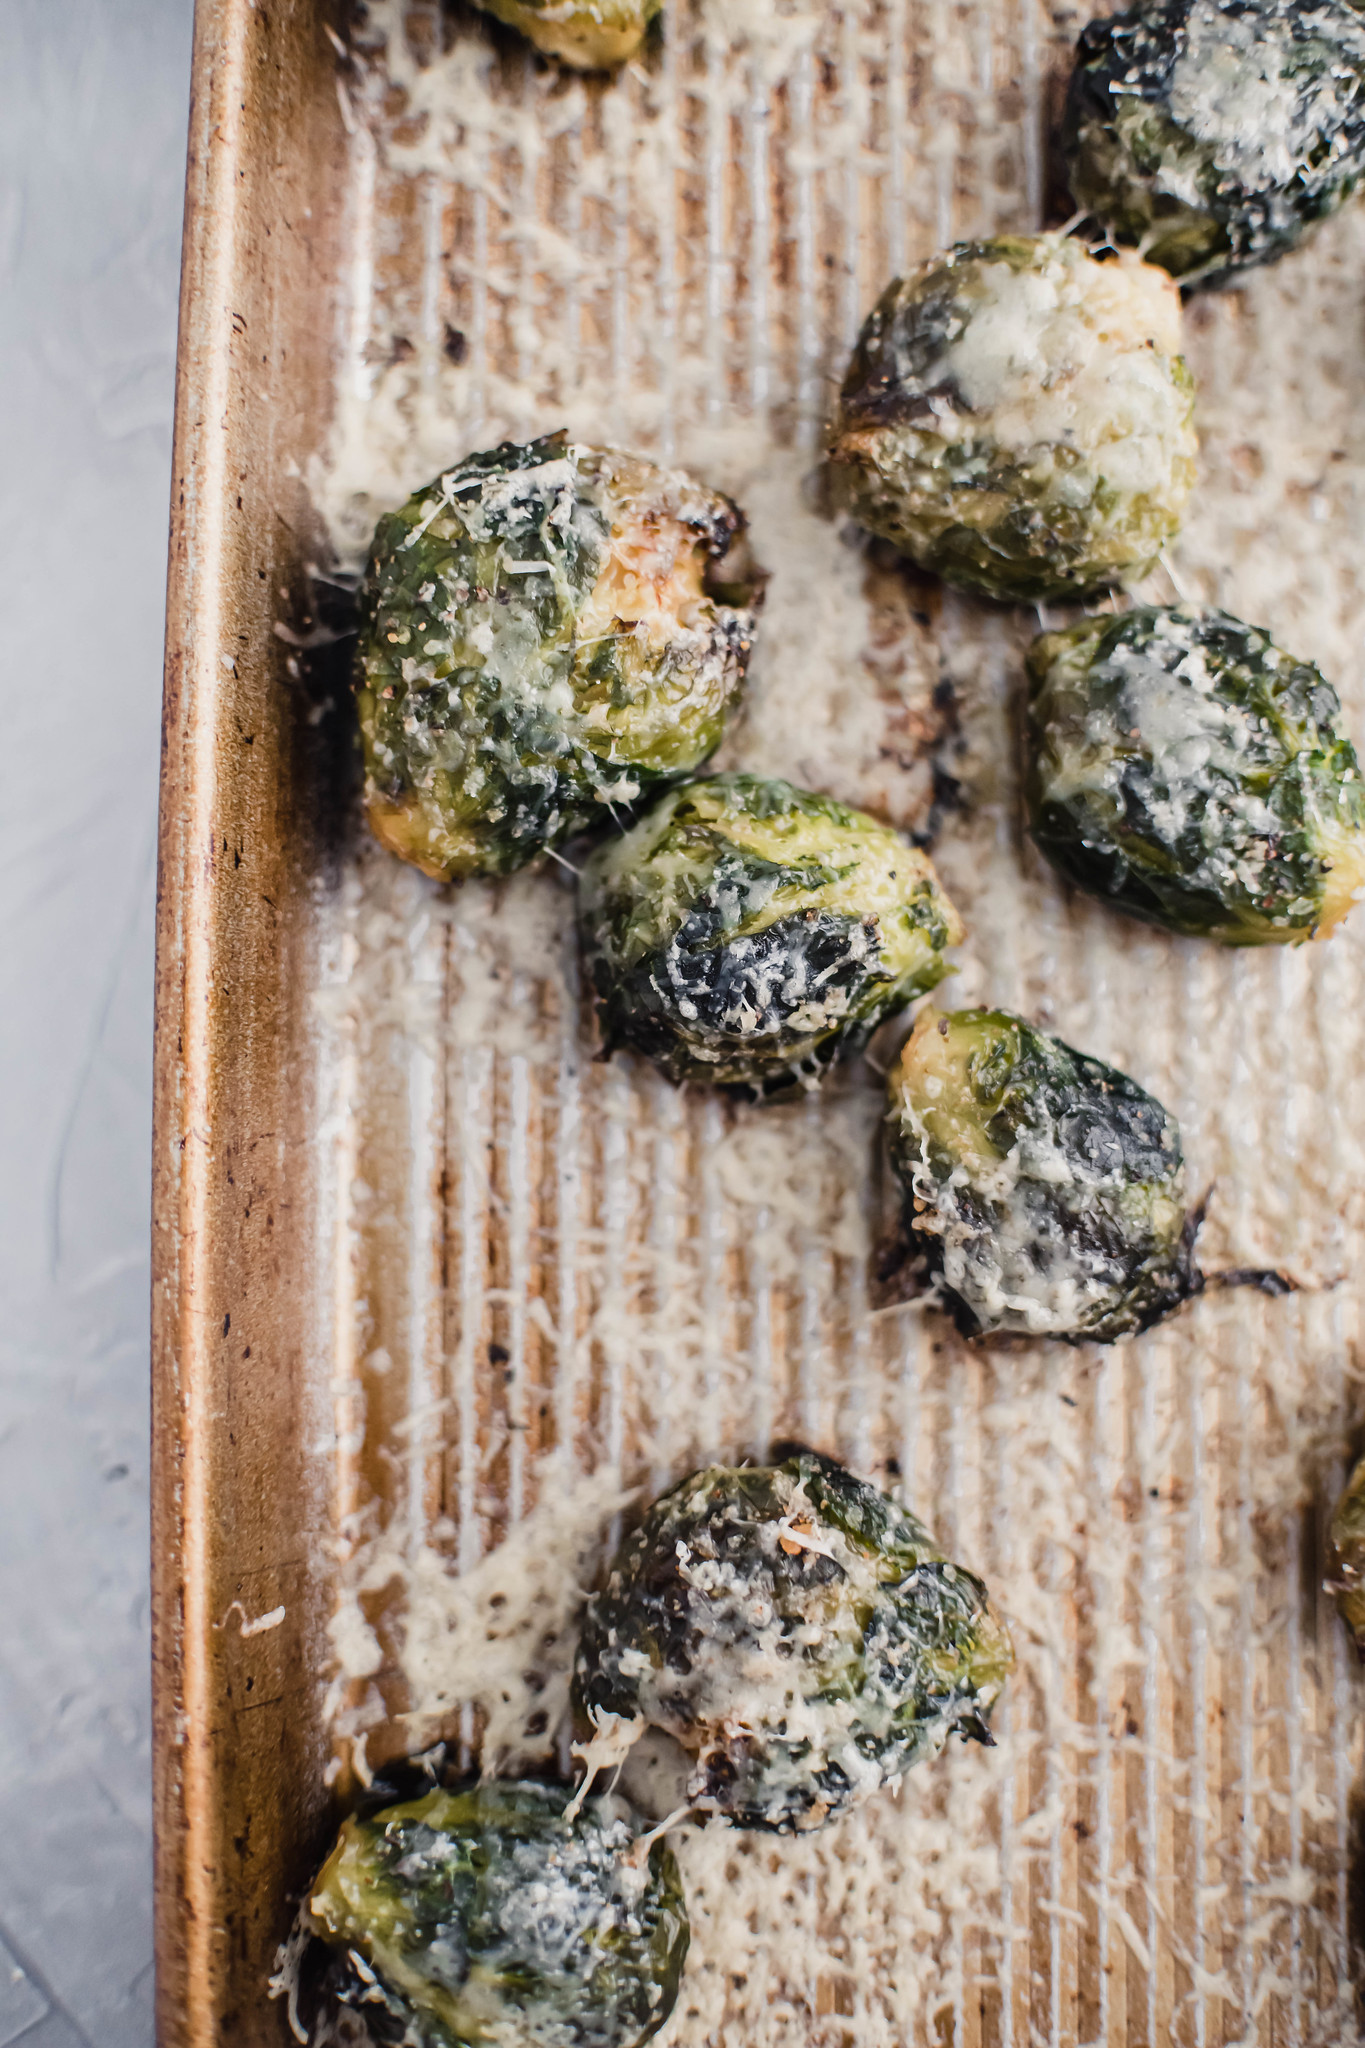 Crispy roasted parmesan brussels sprouts on a baking sheet.